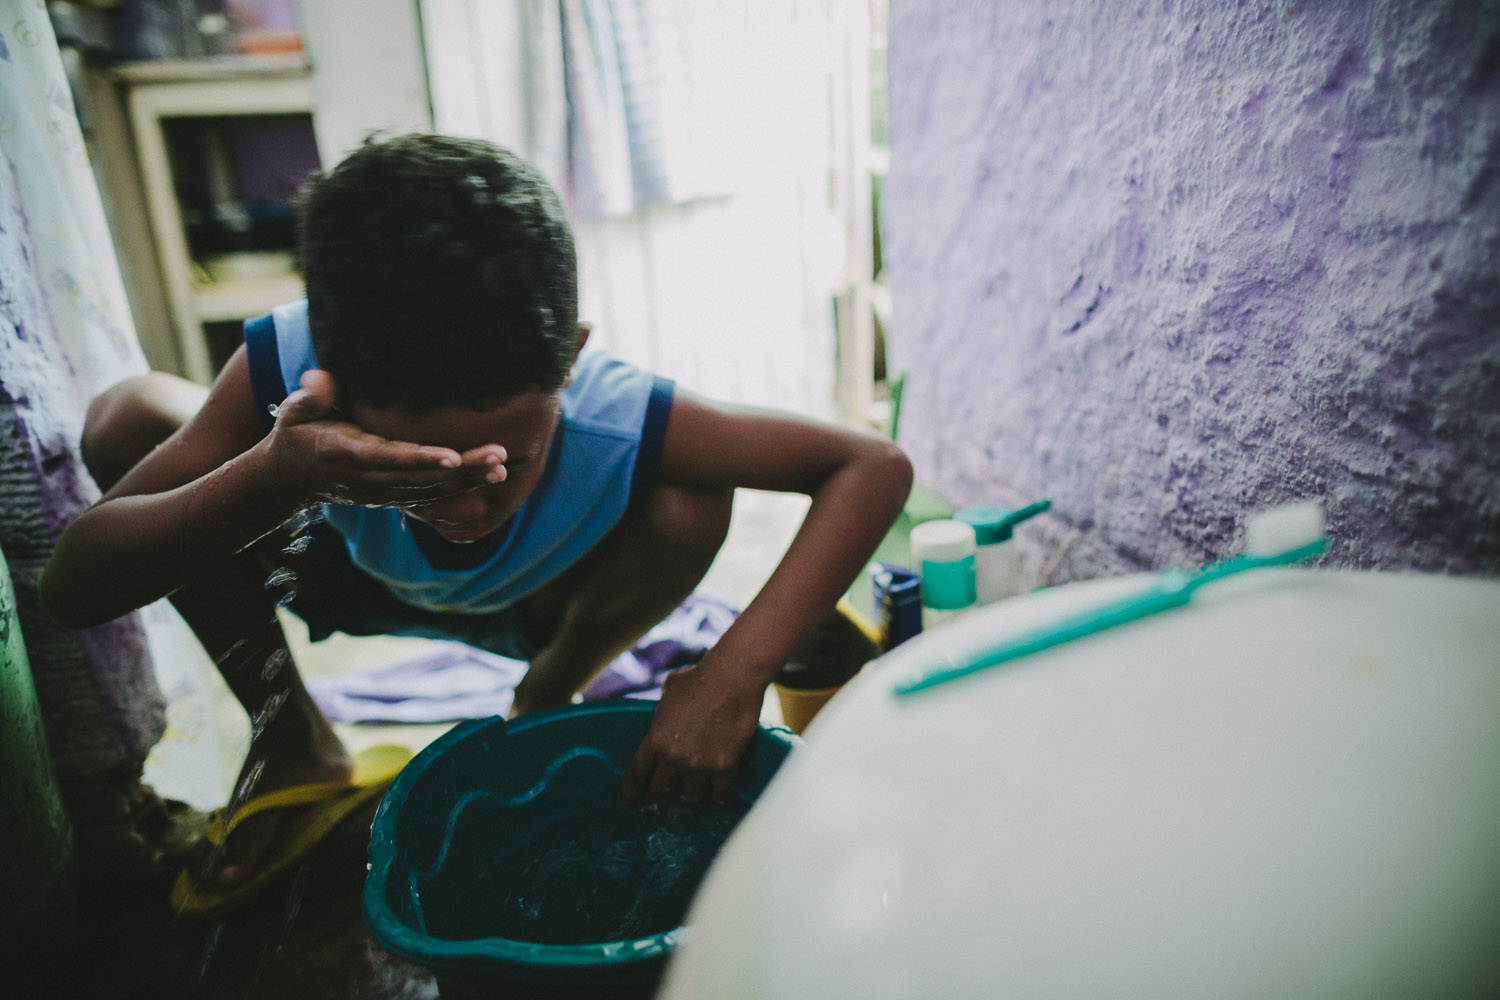   The space where Emidio washes his face in the morning is the same space where the family does all their bathroom, kitchen, and sleeping activities. Emidio's entire house (housing 4 people---soon to be 5) is perhaps no larger than 8 feet by 10 feet.